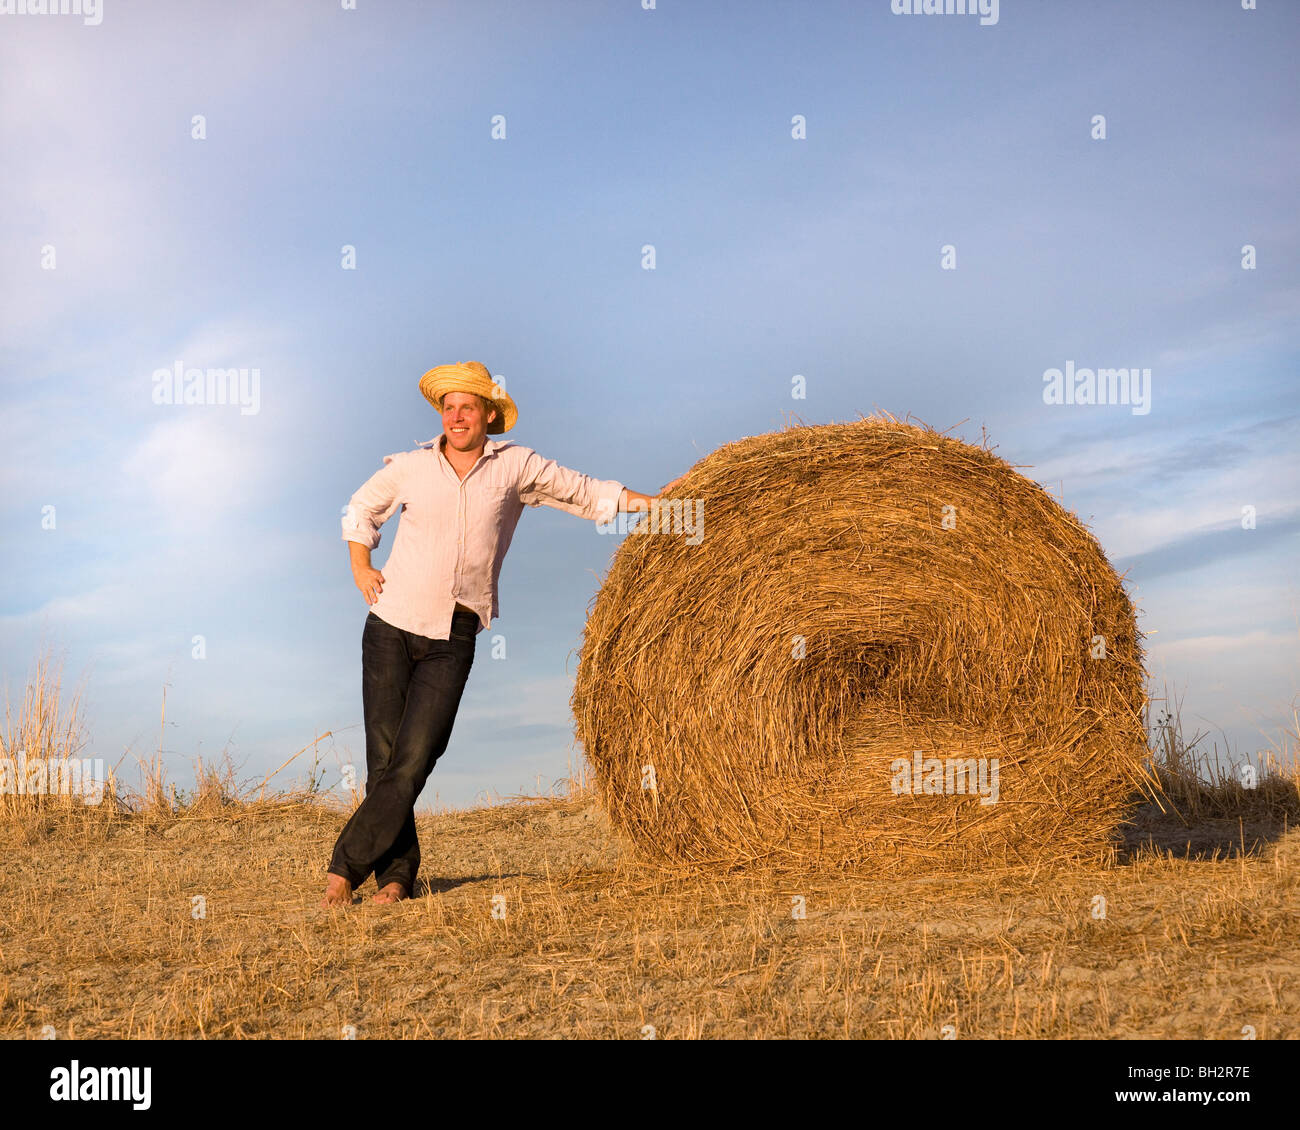 man standing by hay bale Stock Photo